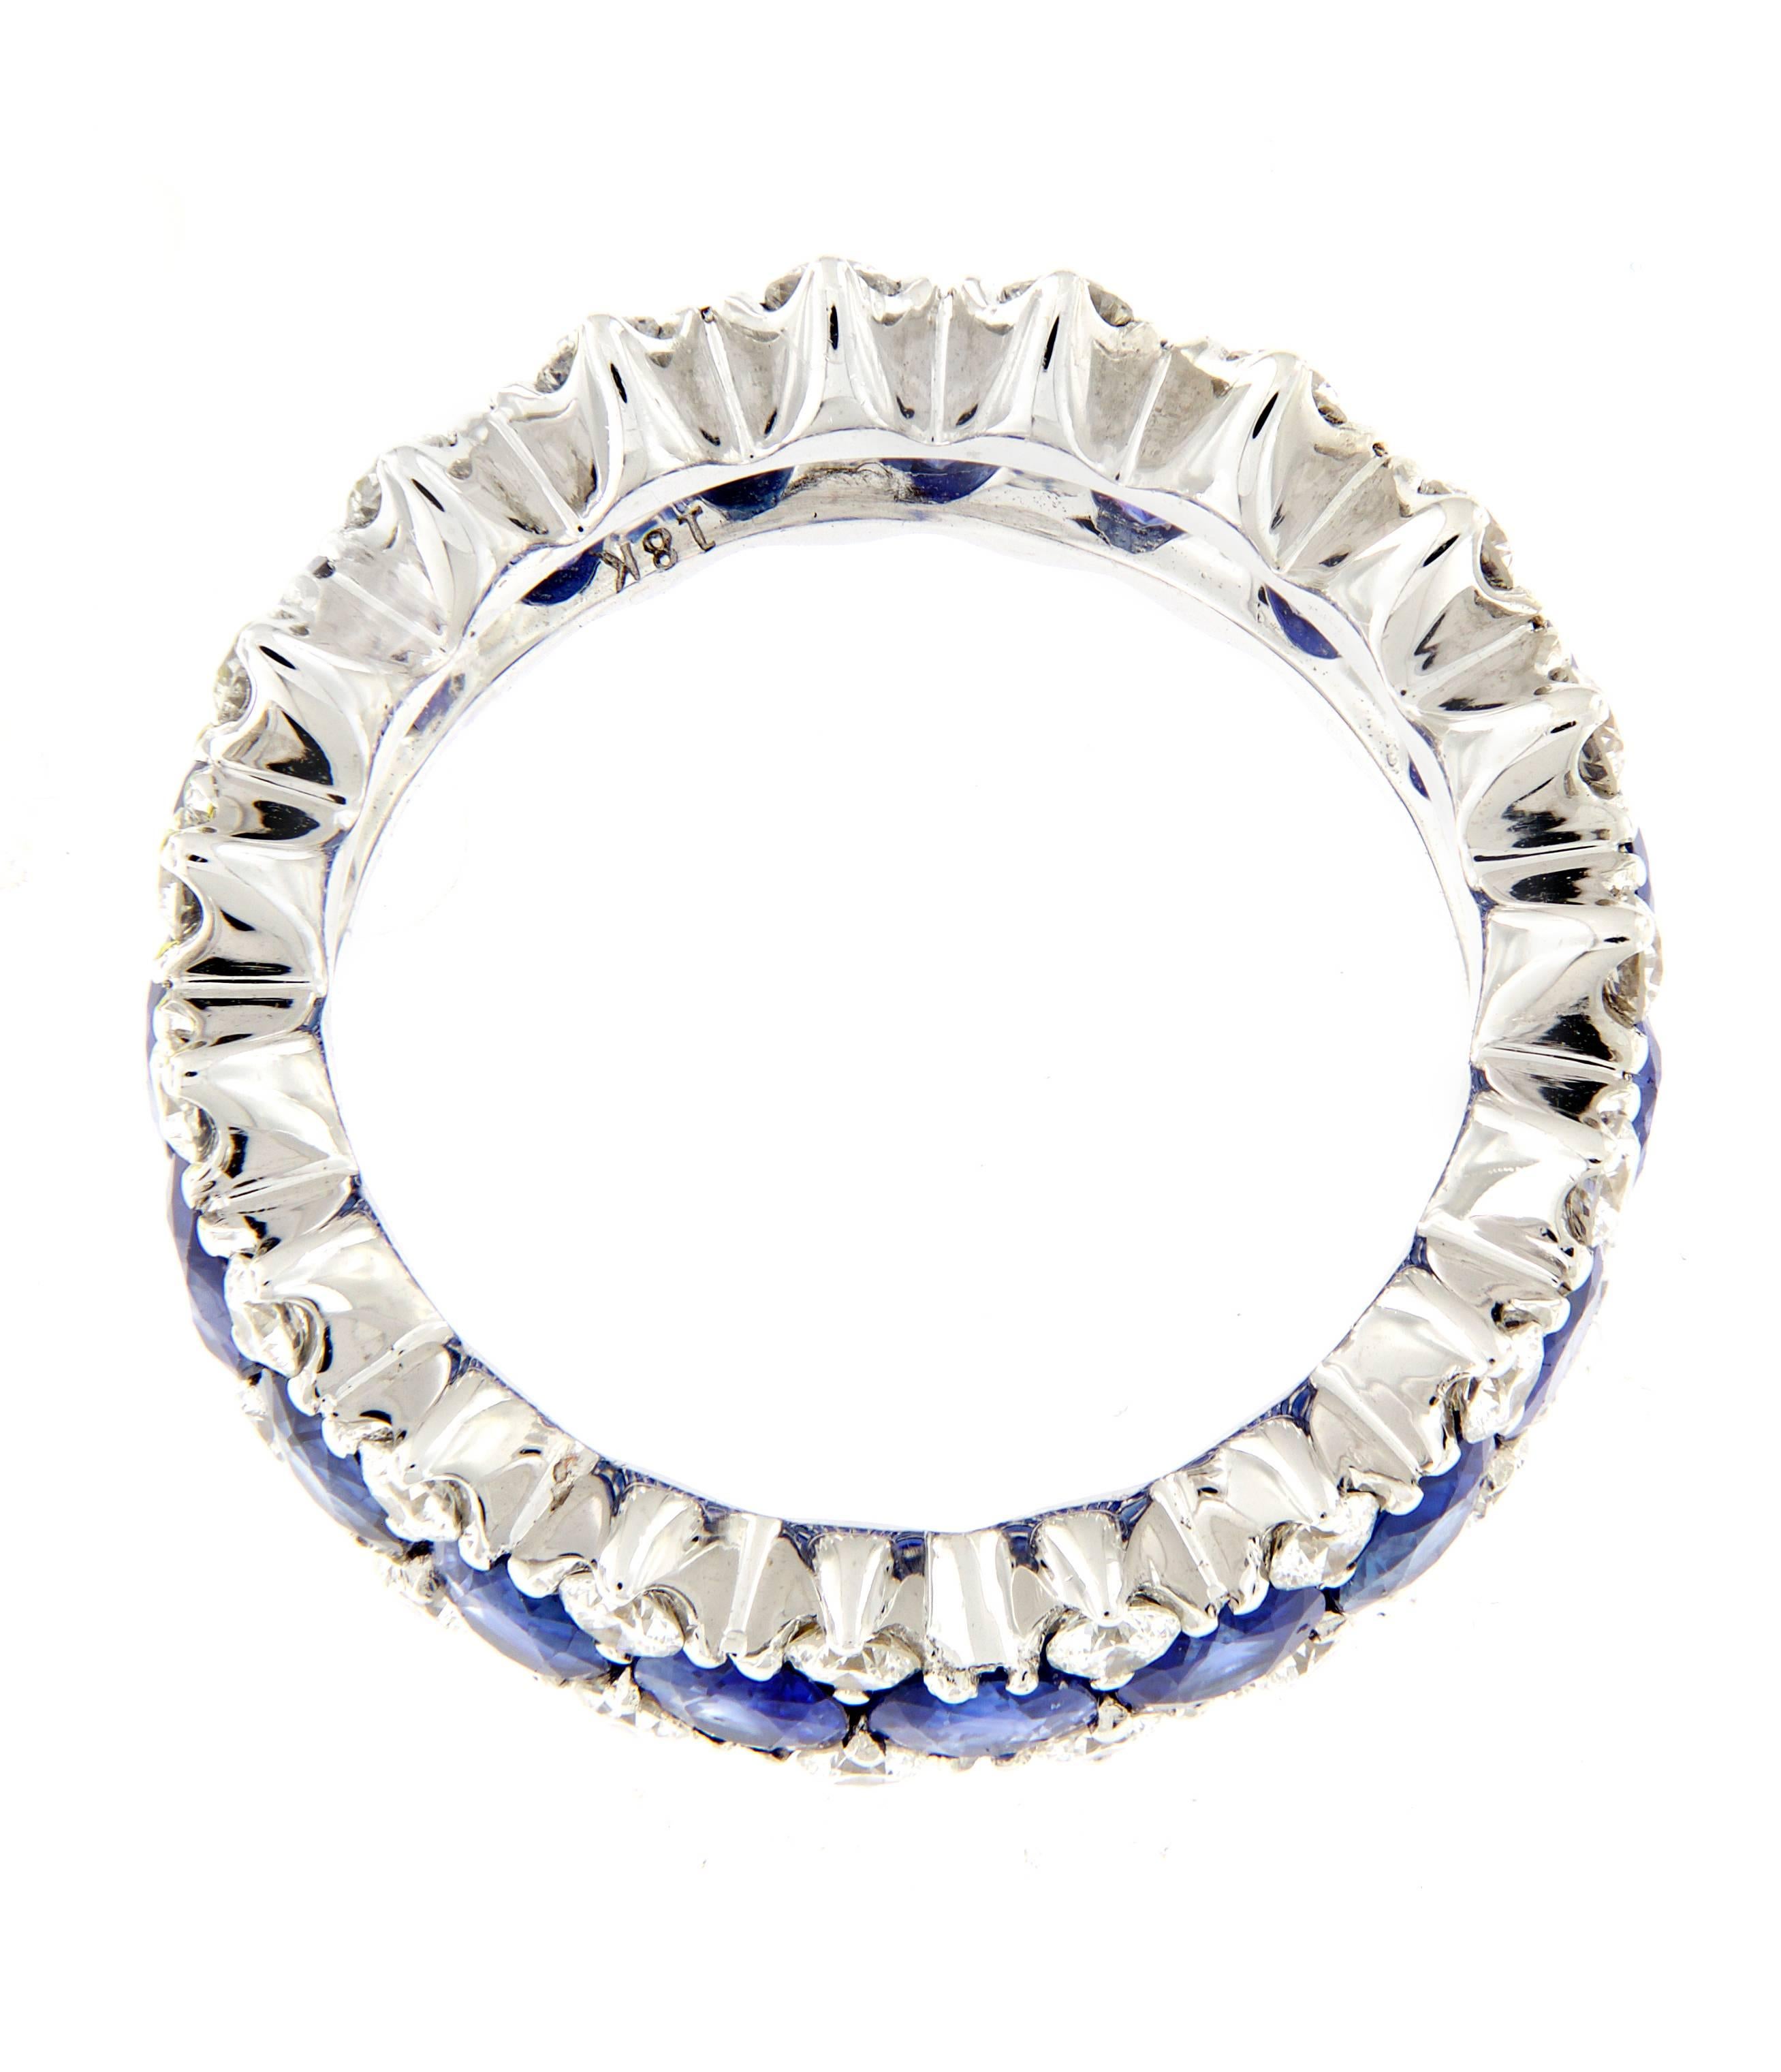 A beautiful combination of oval sapphires and diamonds create a stunning eternity ring. Weighs 7.7 grams. Ring Size 7.5.

Sapphire 6.41 cttw
Diamond 1.36 cttw